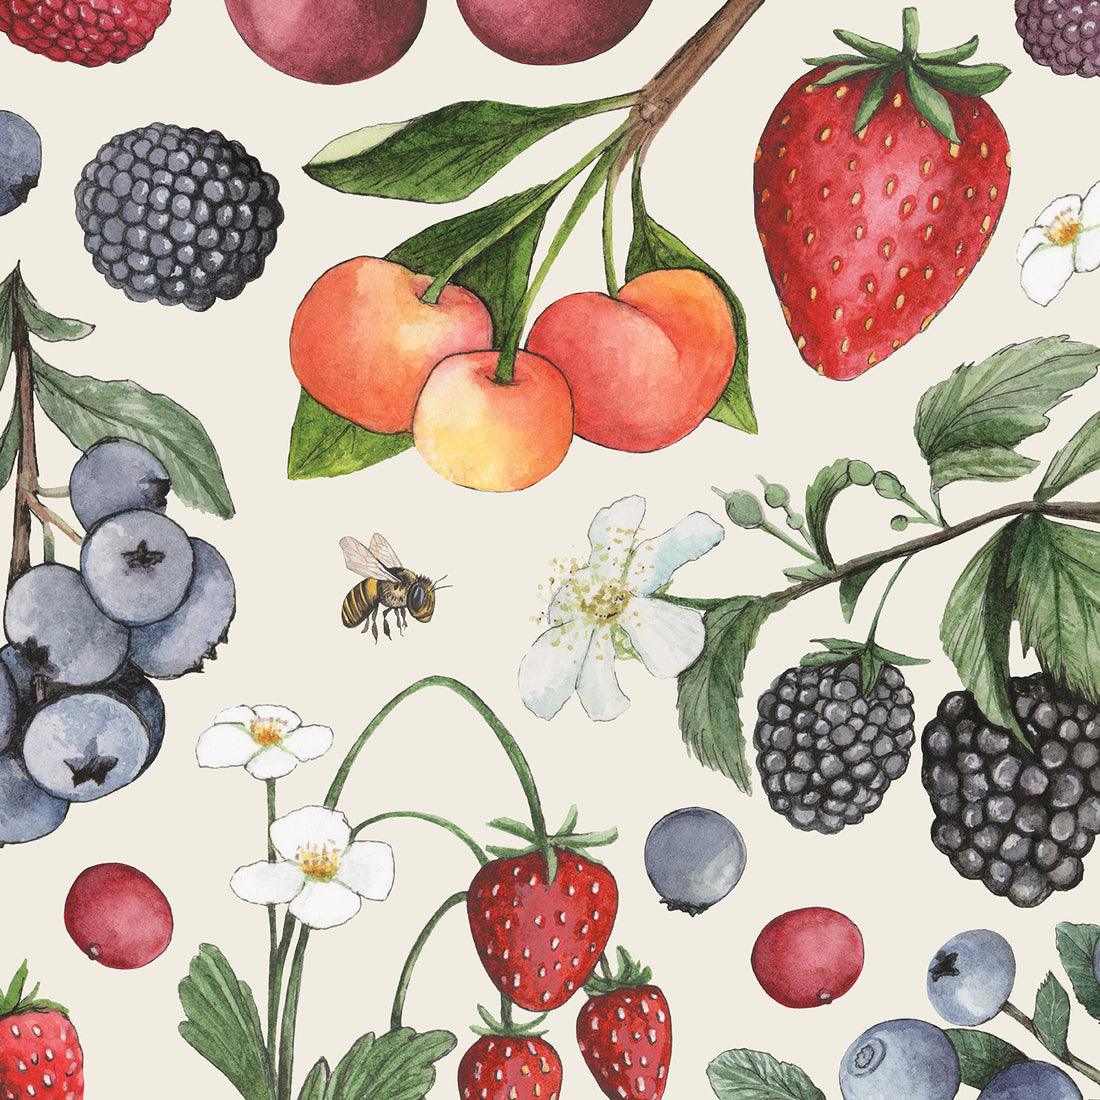 A square, cream cocktail napkin featuring a scatter of vibrant, illustrated berries and white blooms, with a single bee among the fruits.